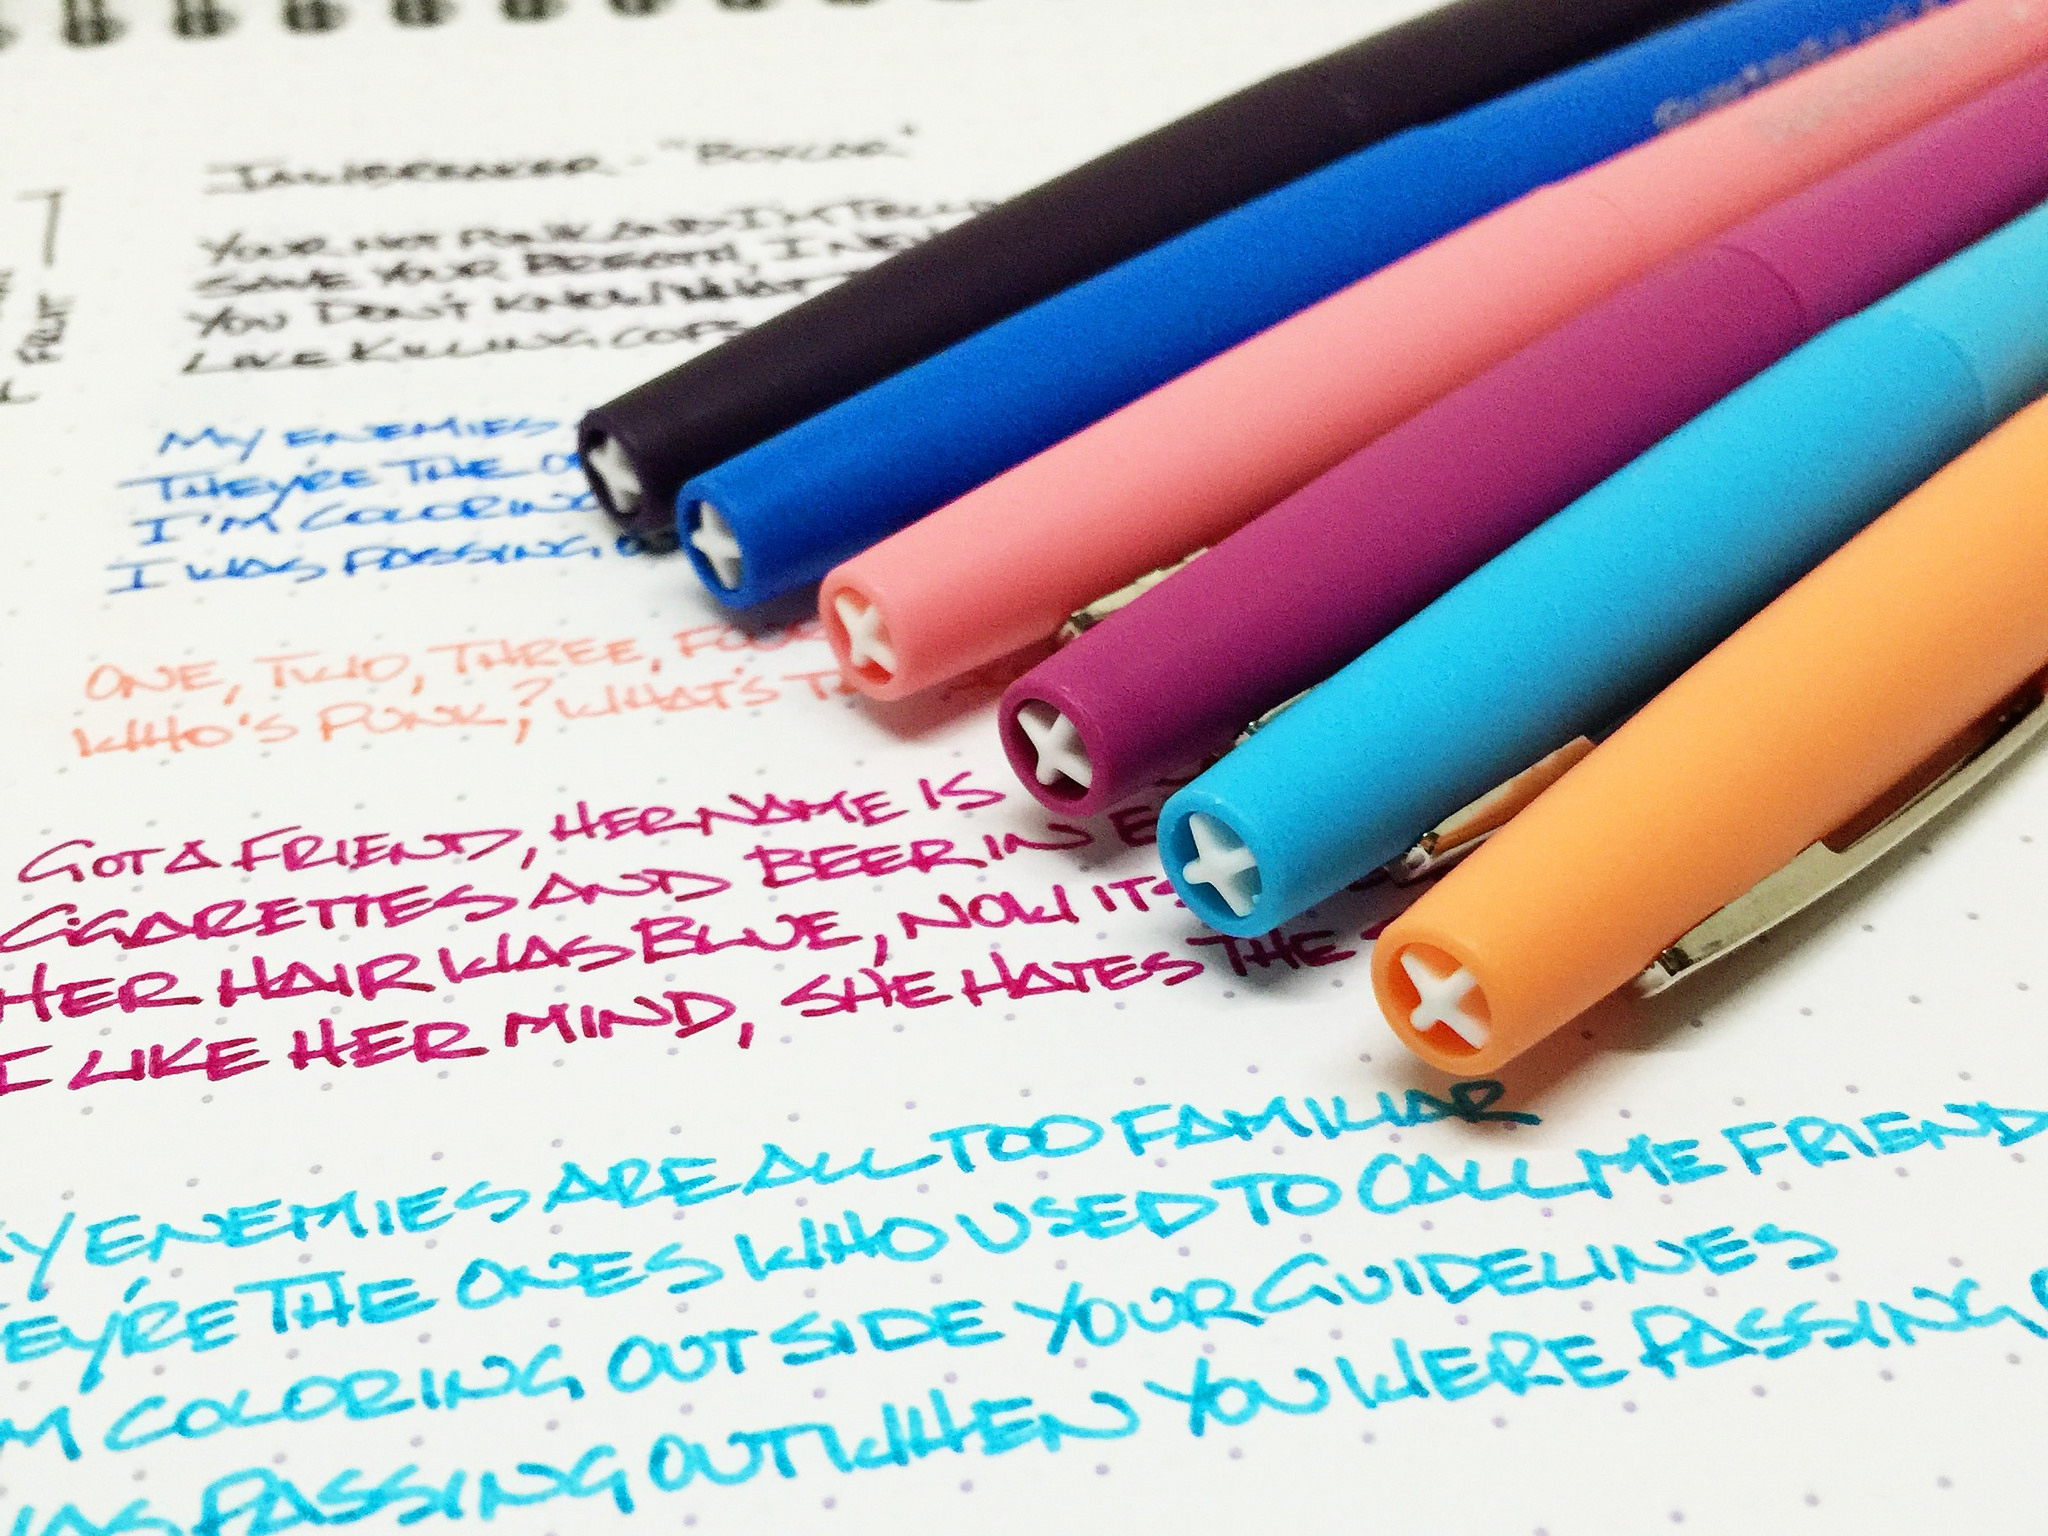 Paper Mate Flair Review — The Pen Addict